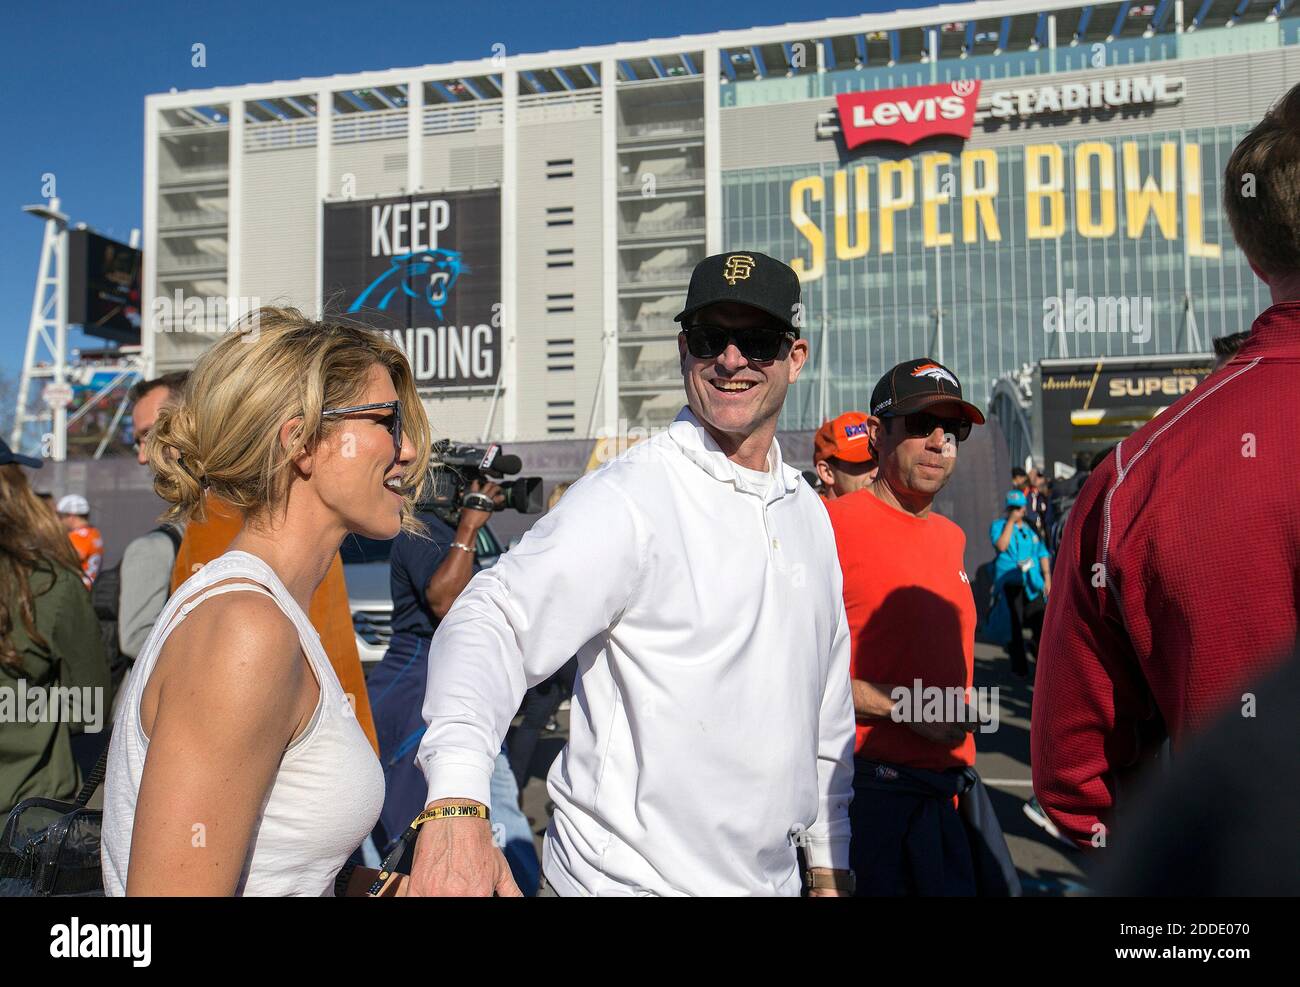 NO FILM, NO VIDEO, NO TV, NO DOCUMENTARY - Former San Francisco 49ers coach  Jim Harbaugh, middle, and his wife, Sarah Harbaugh, left, head into Levi's  Stadium for Super Bowl 50 at